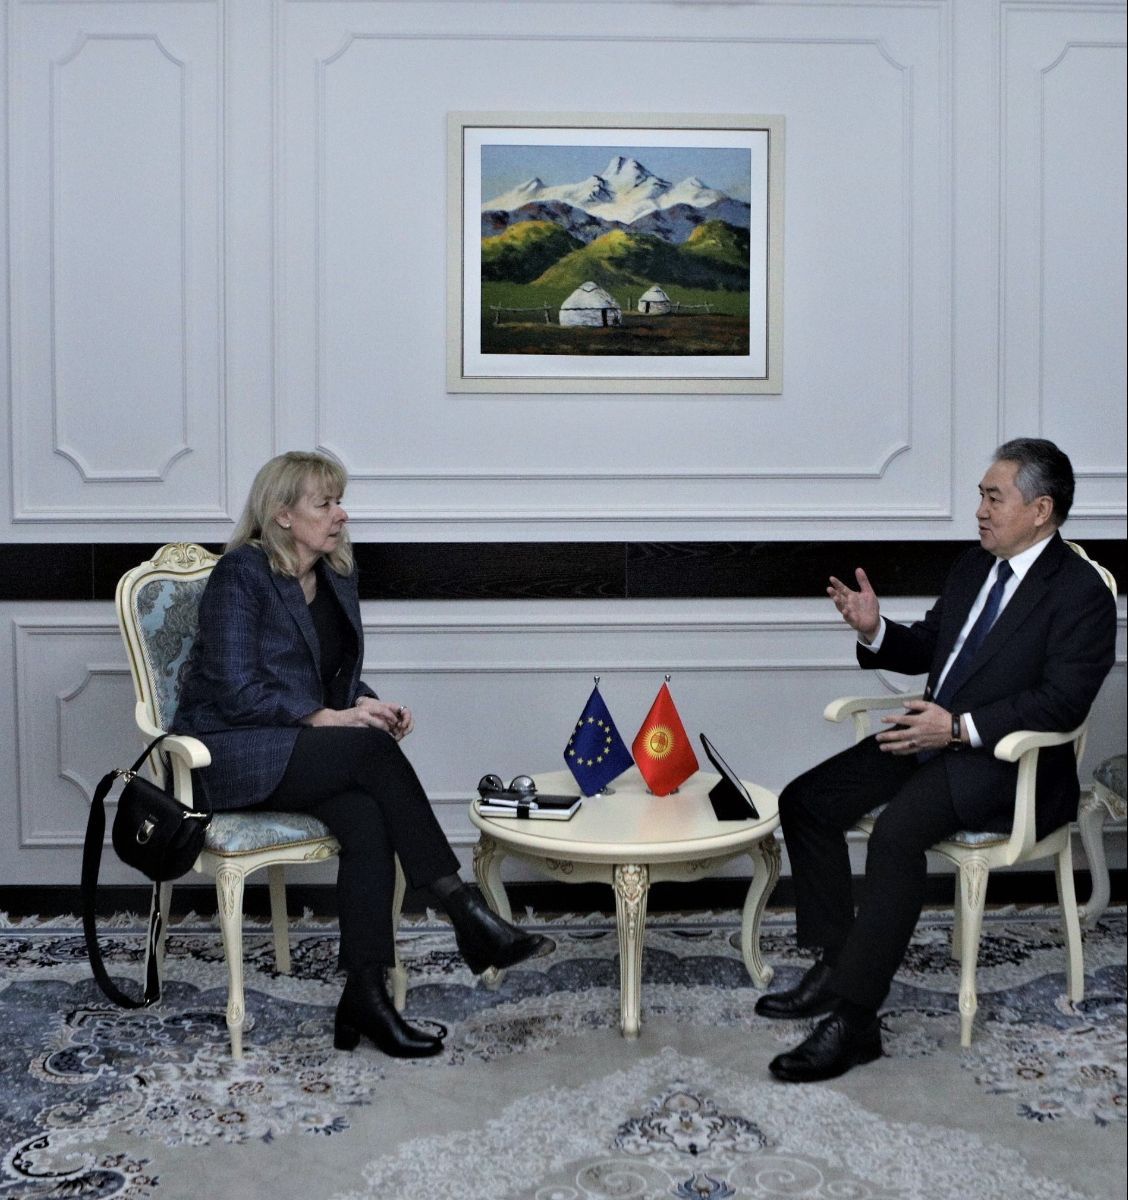 Minister of Foreign Affairs of the Kyrgyz Republic Zheenbek Kulubaev met with the European Union Special Representative for Central Asia Teri Hakala and the European Union Special Envoy for Afghanistan Tomas Niklasson